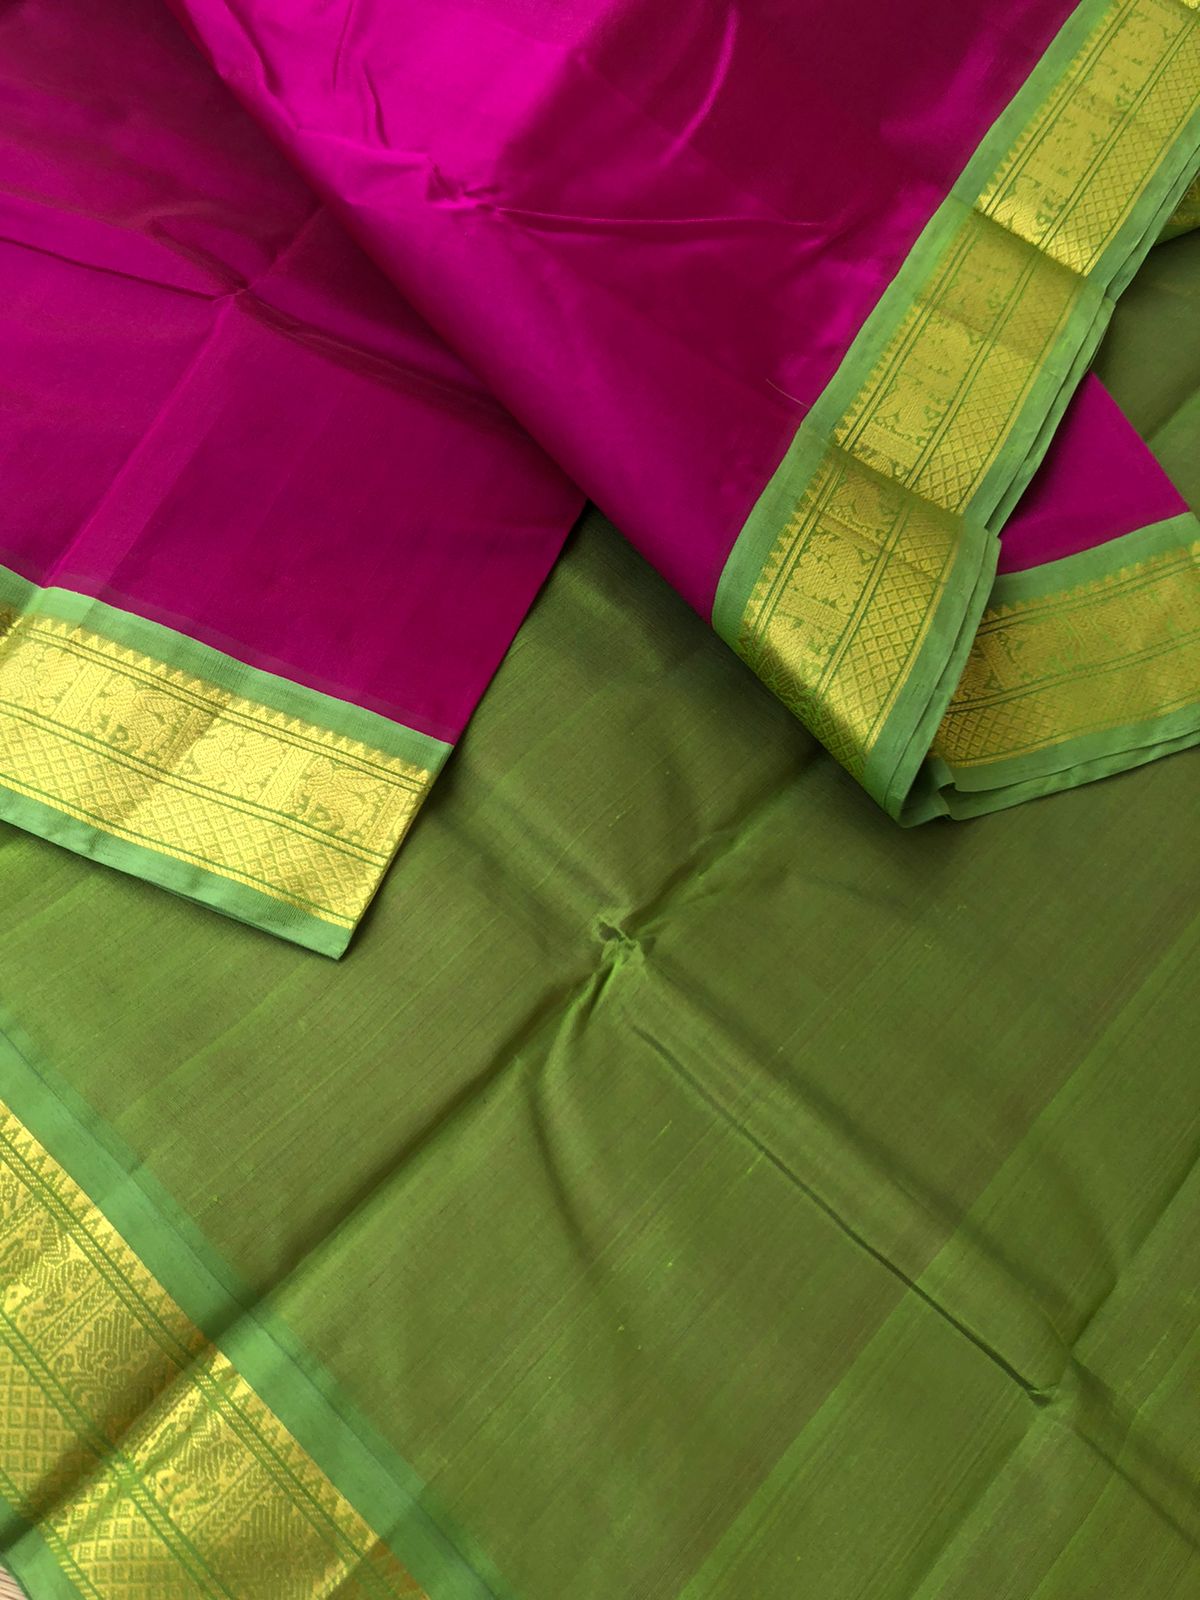 Korvai Silk Cotton - deepest dark pink and green